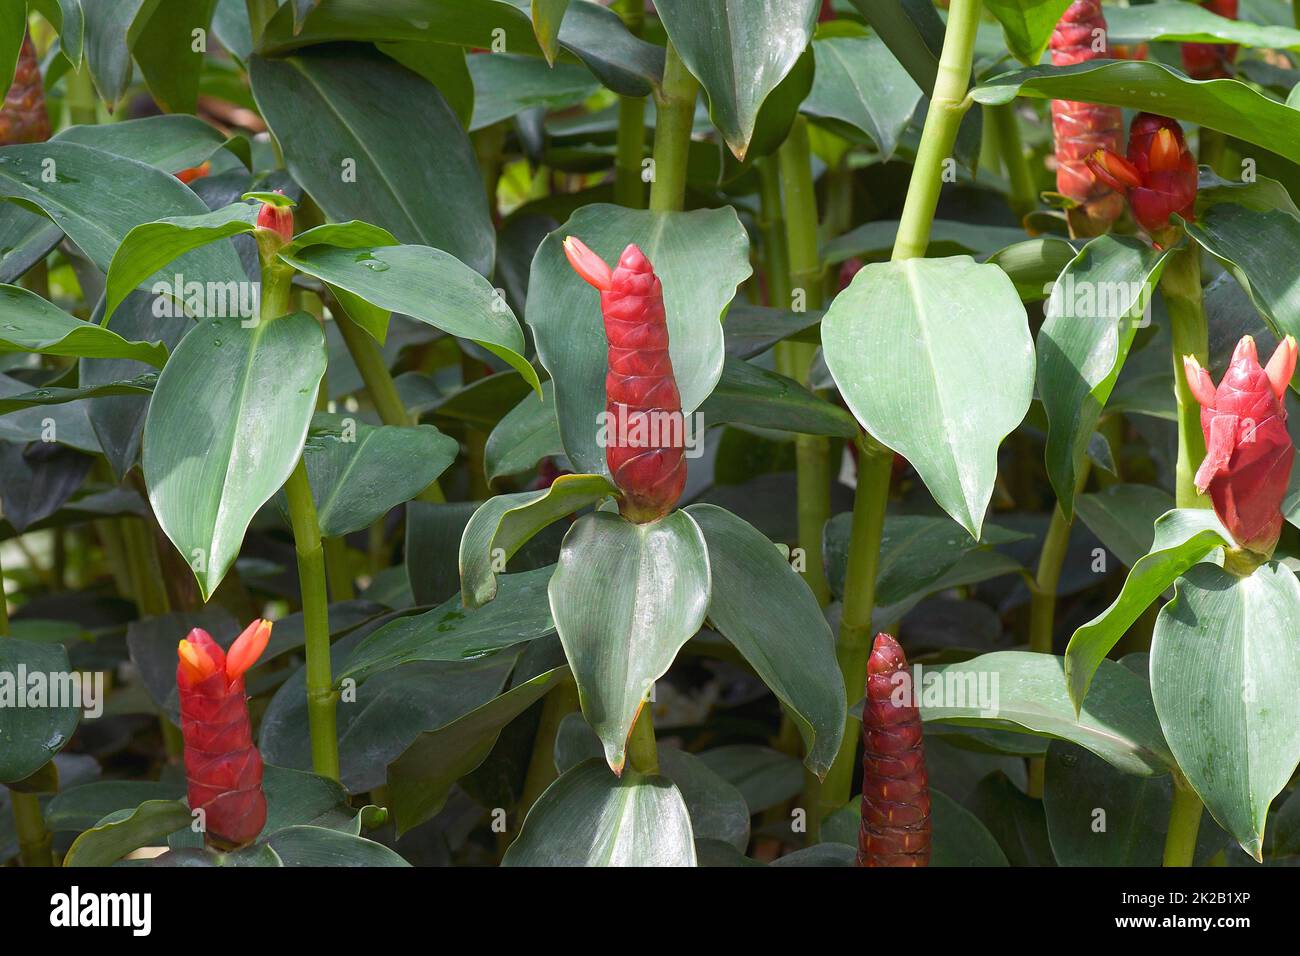 Close-up image of Red Button ginger plants Stock Photo